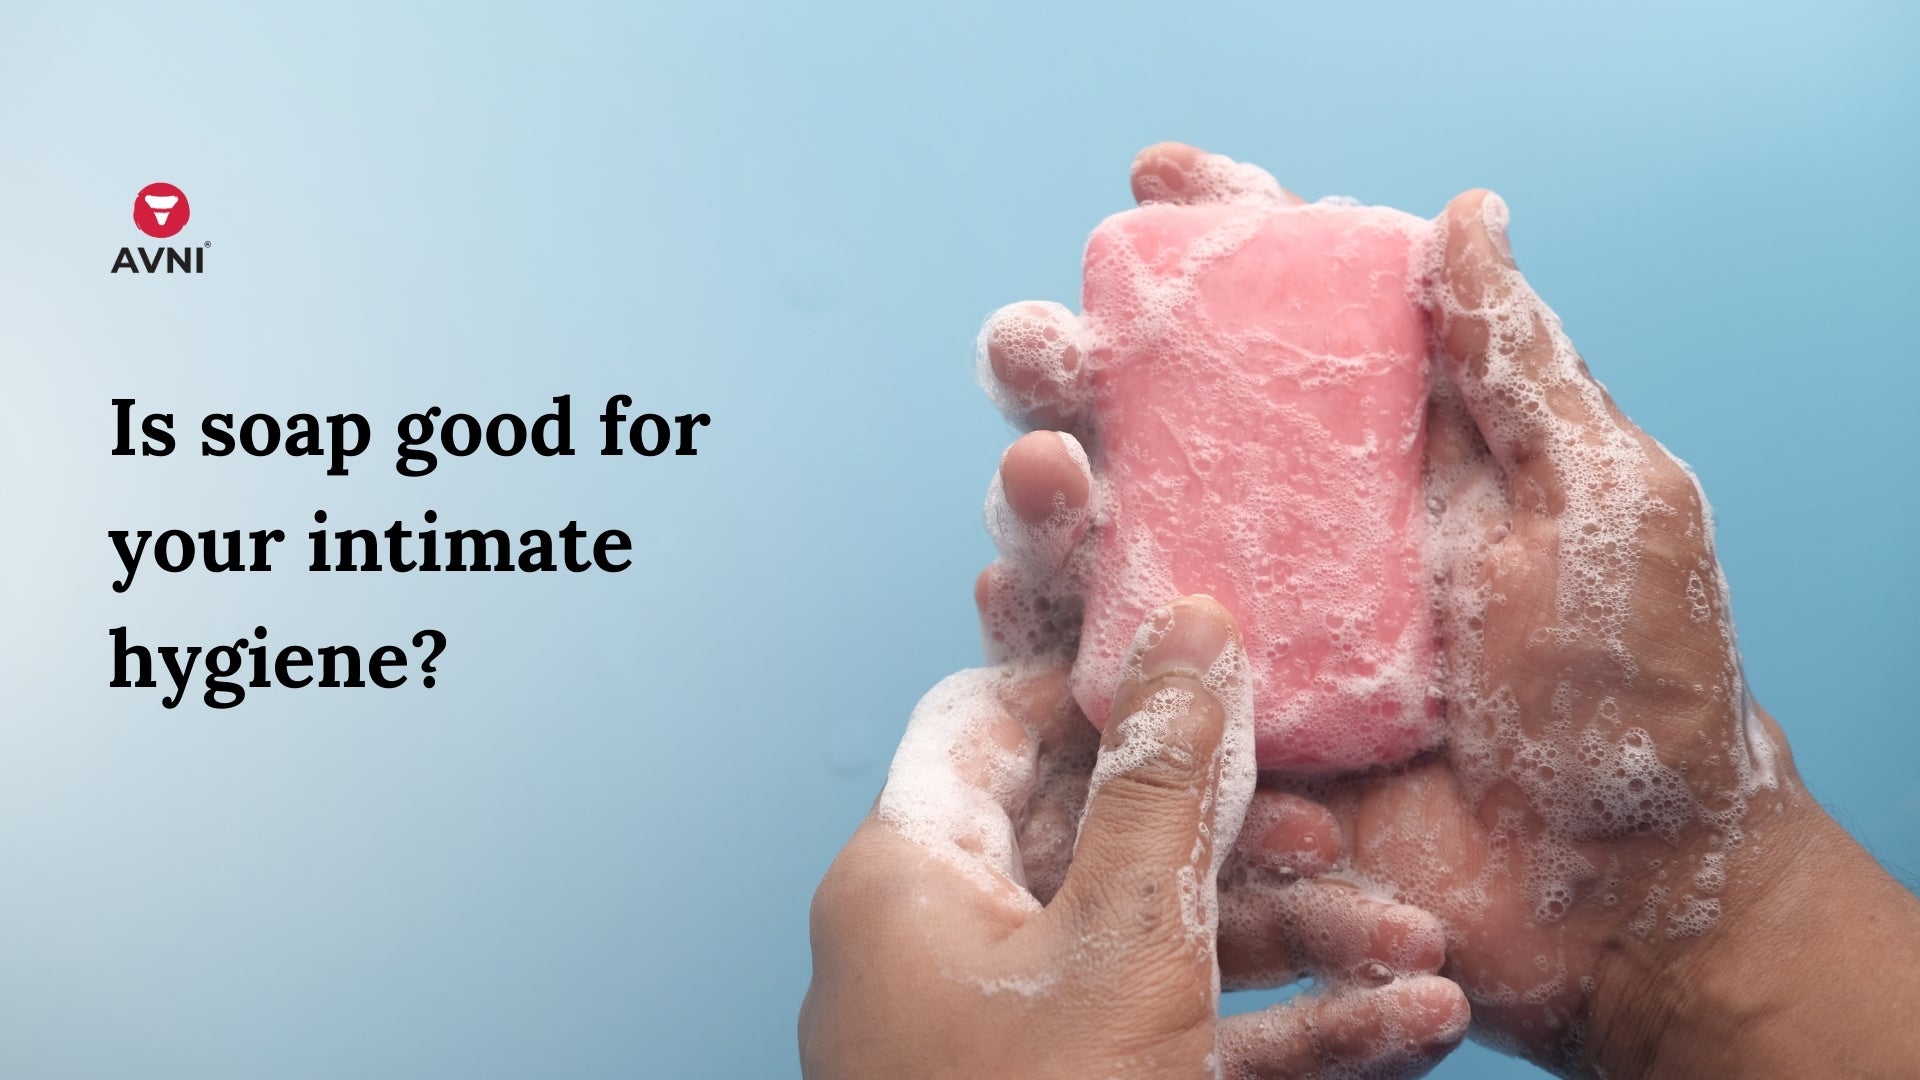 IS SOAP GOOD FOR YOUR INTIMATE HYGIENE?